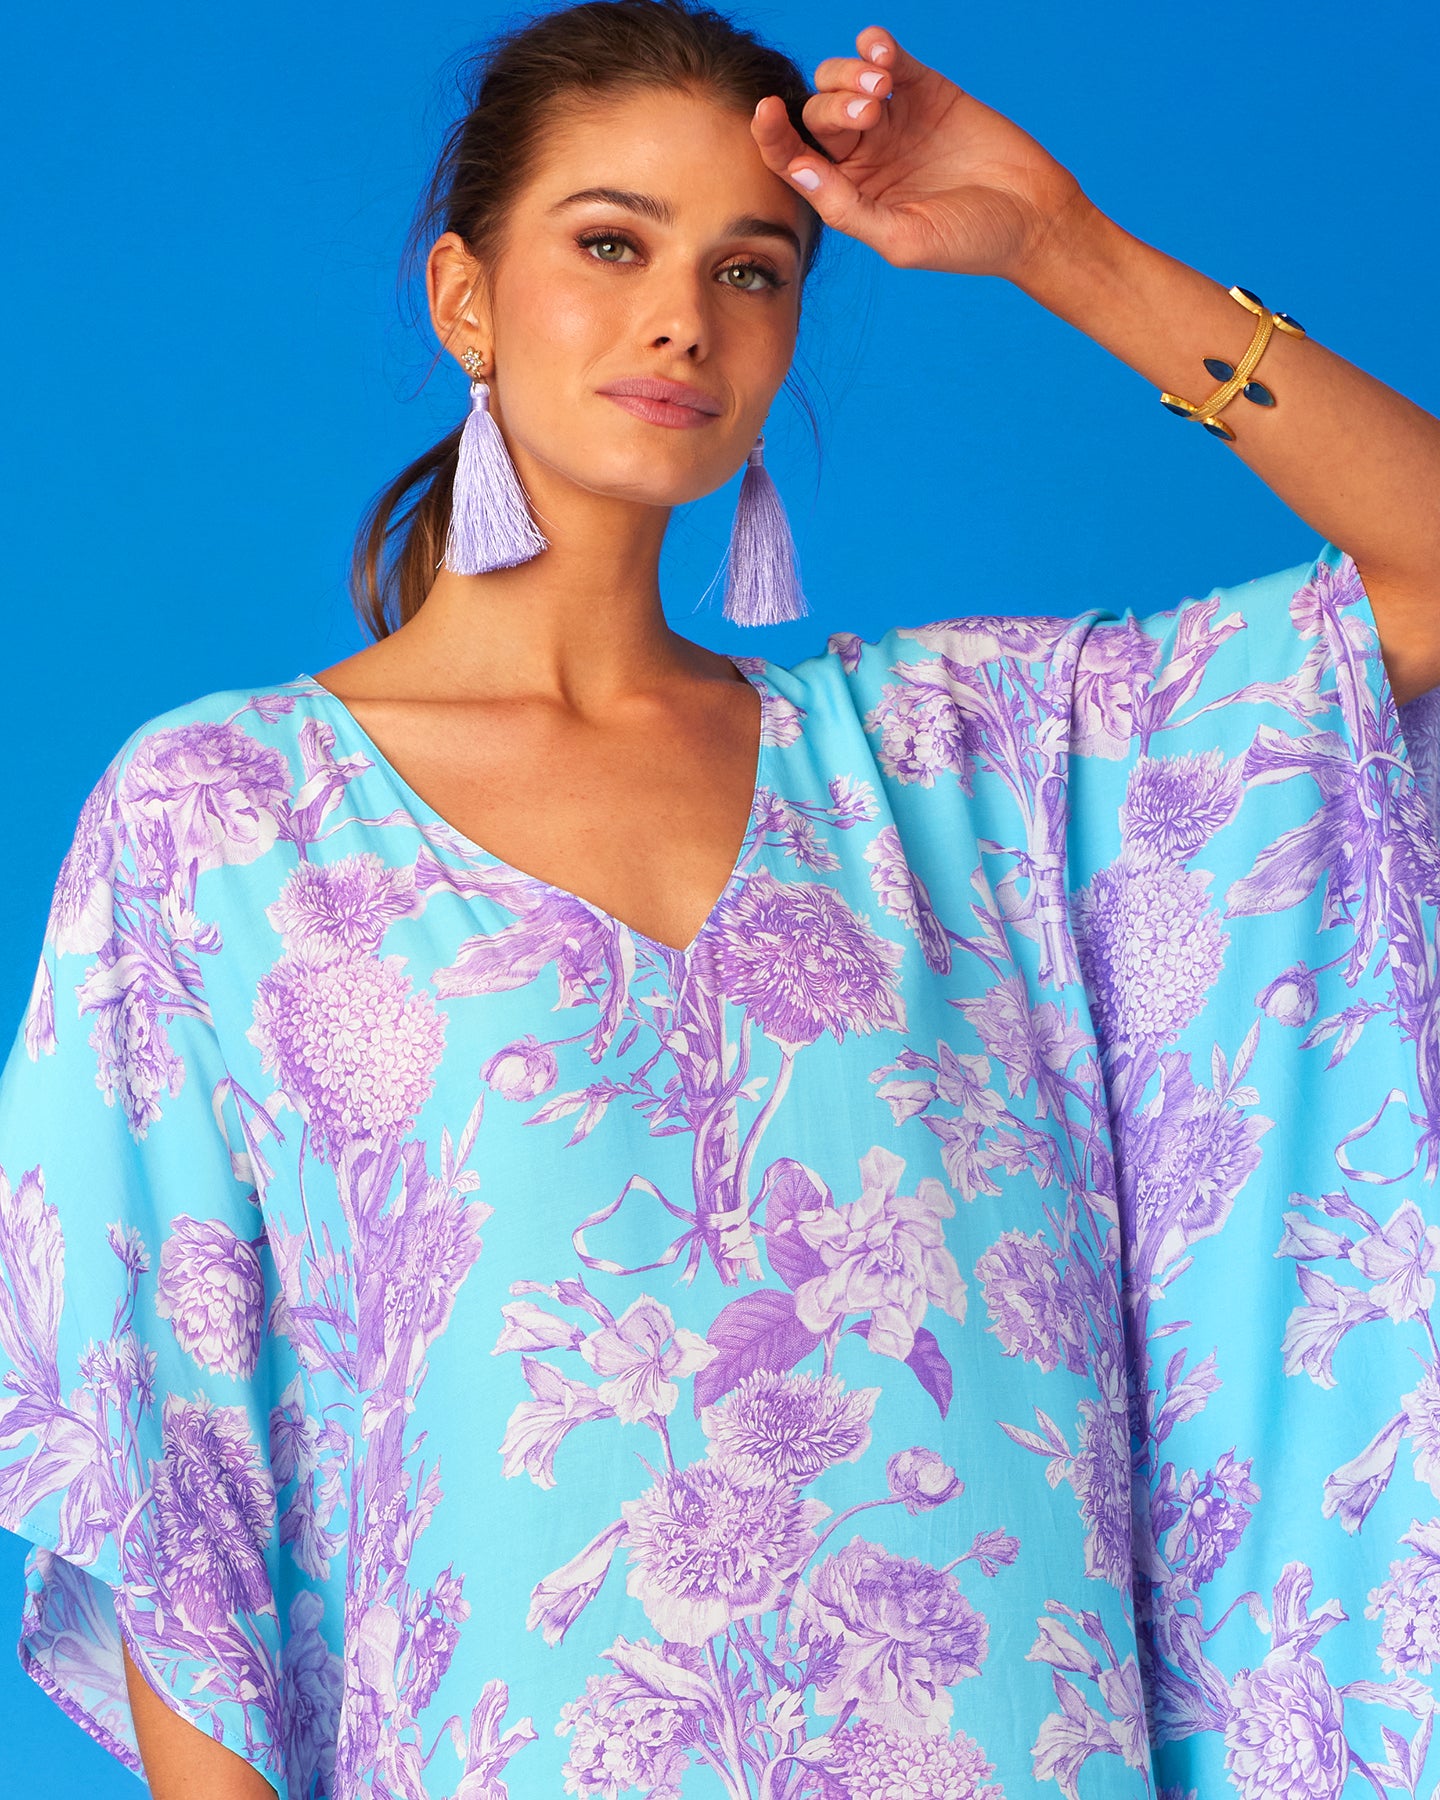 Camille Kaftan in Turquoise and Purple Floral Toile-Closeup